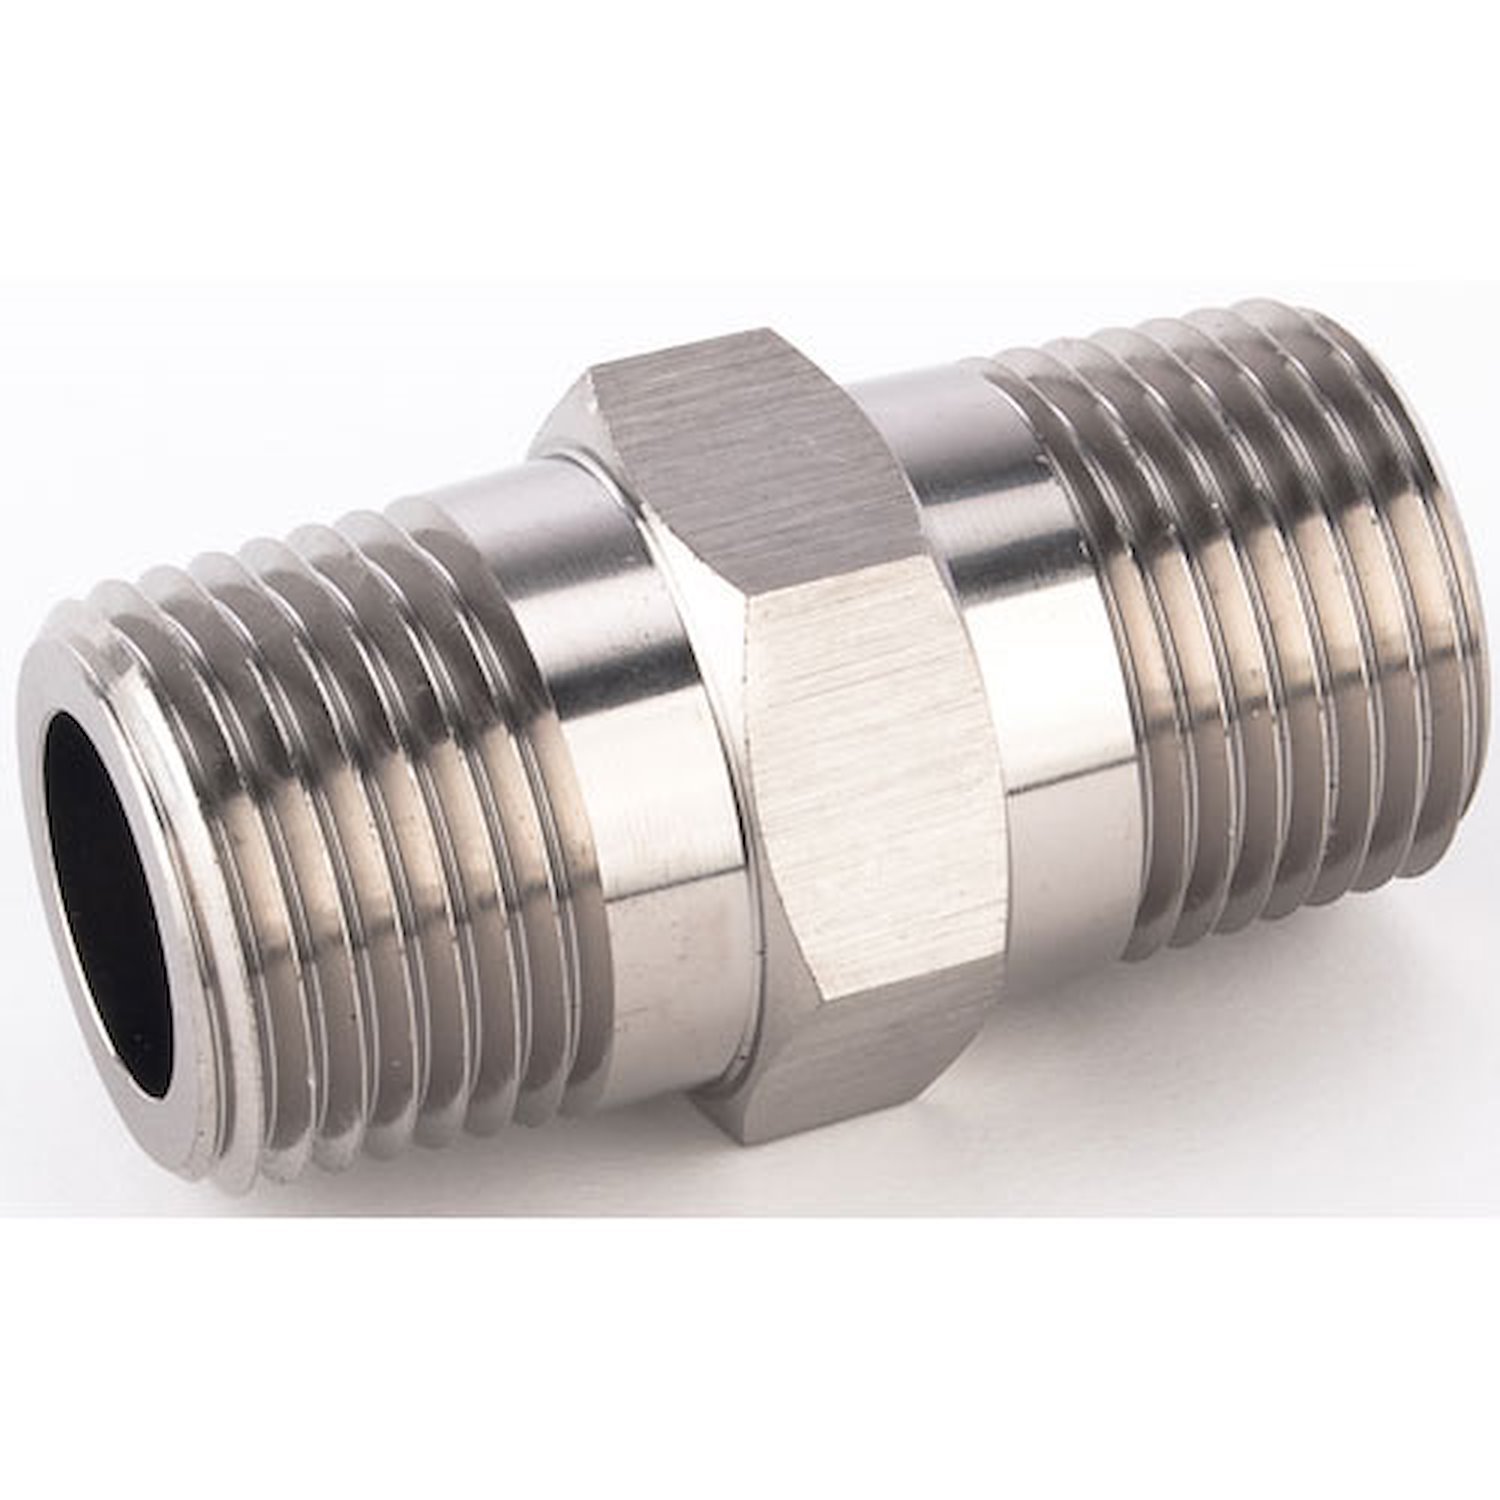 NPT to NPT Straight Union Fitting [3/8 in. NPT Male to 3/8 in. NPT Male, Nickle]